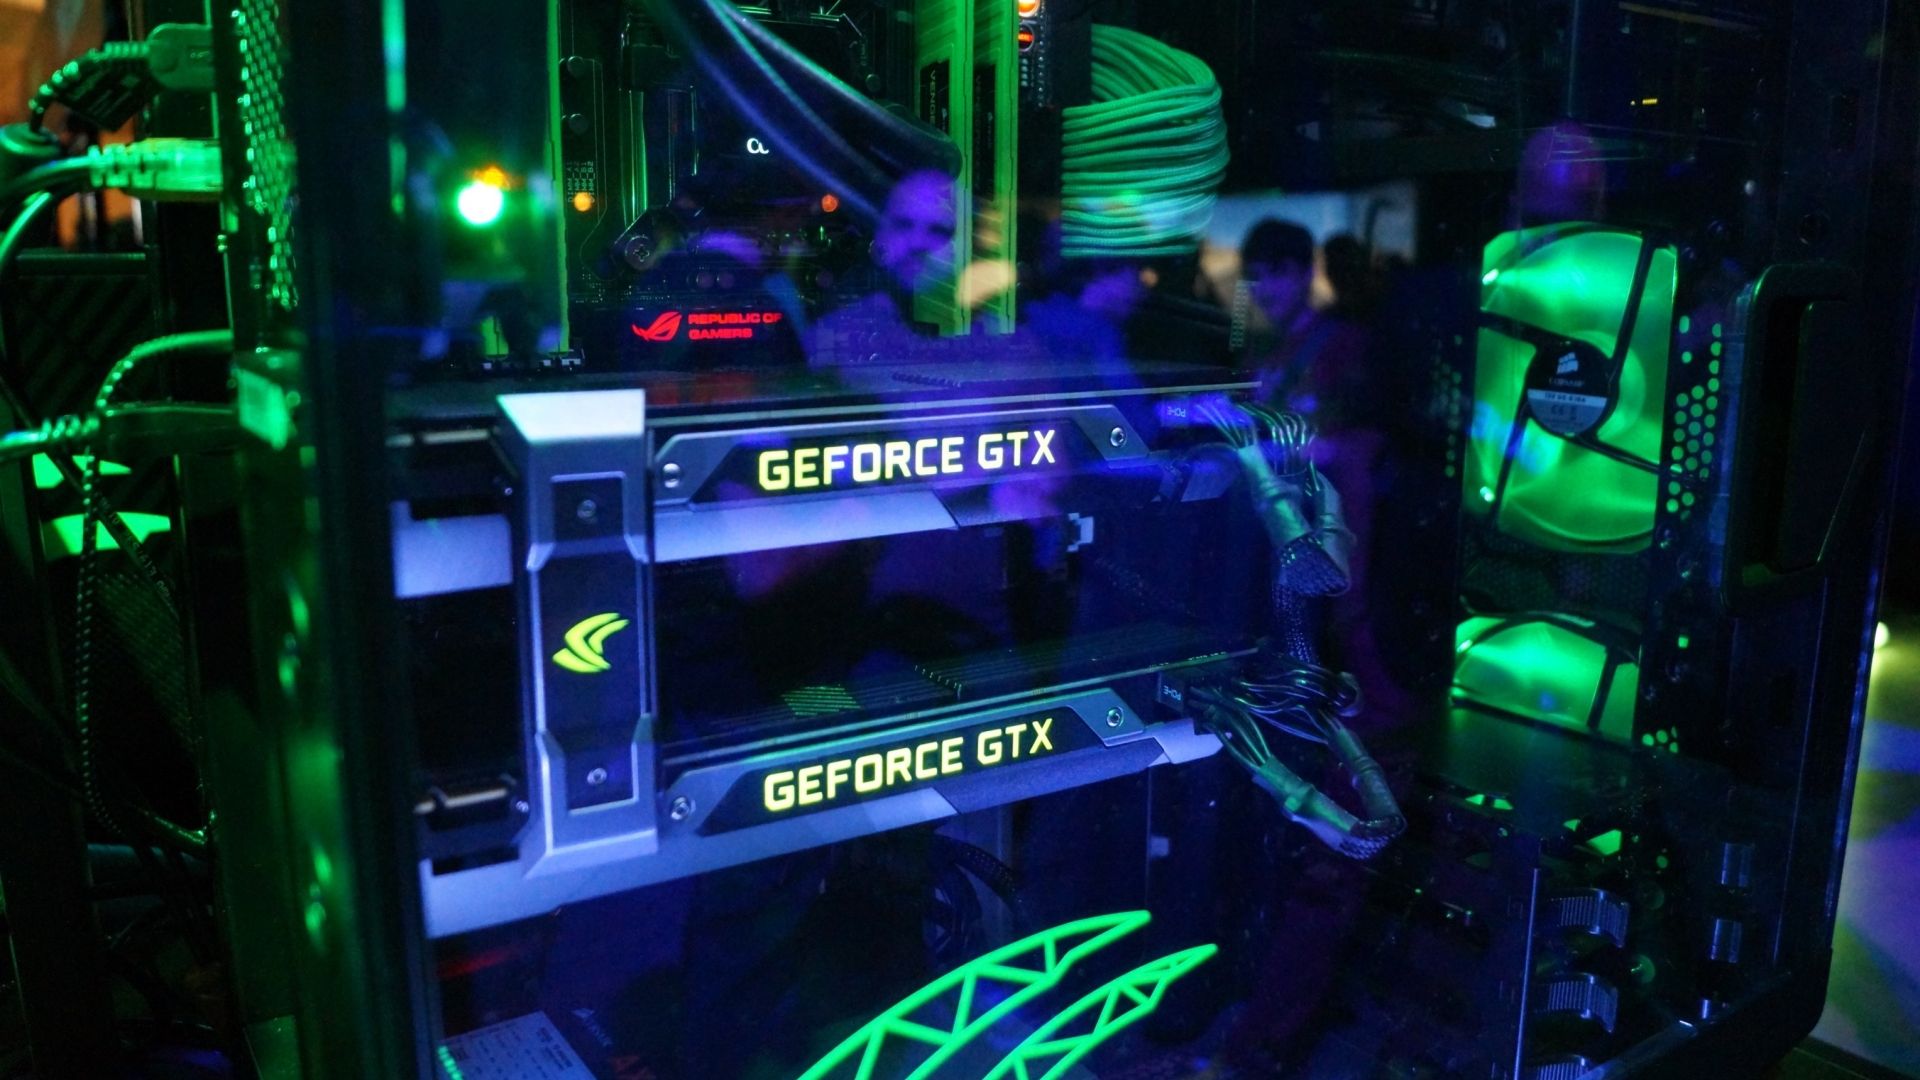 Free download Nvidia announces GTX 970 and GTX 980 graphics cards